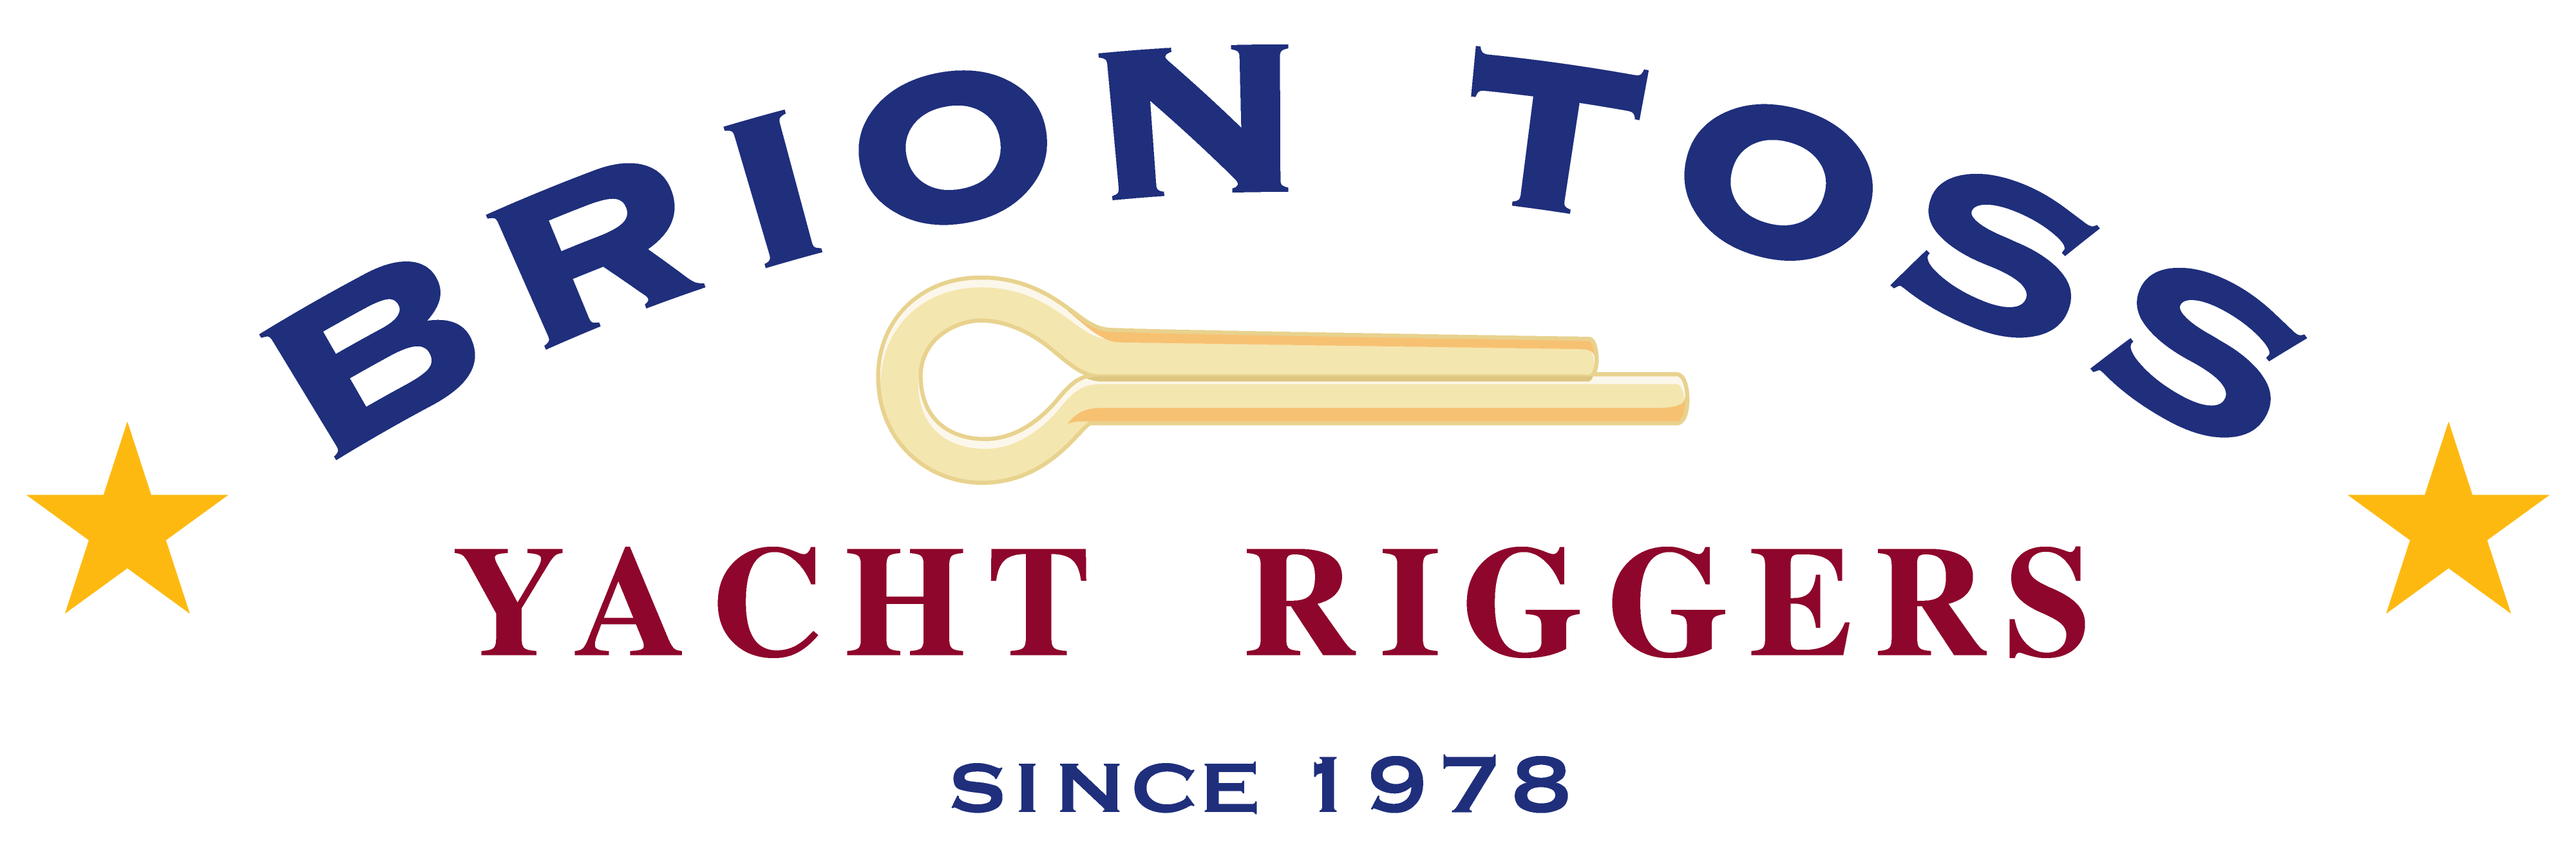 A cotter pin and stars around the words Brion Toss Yacht Riggers Since 1978